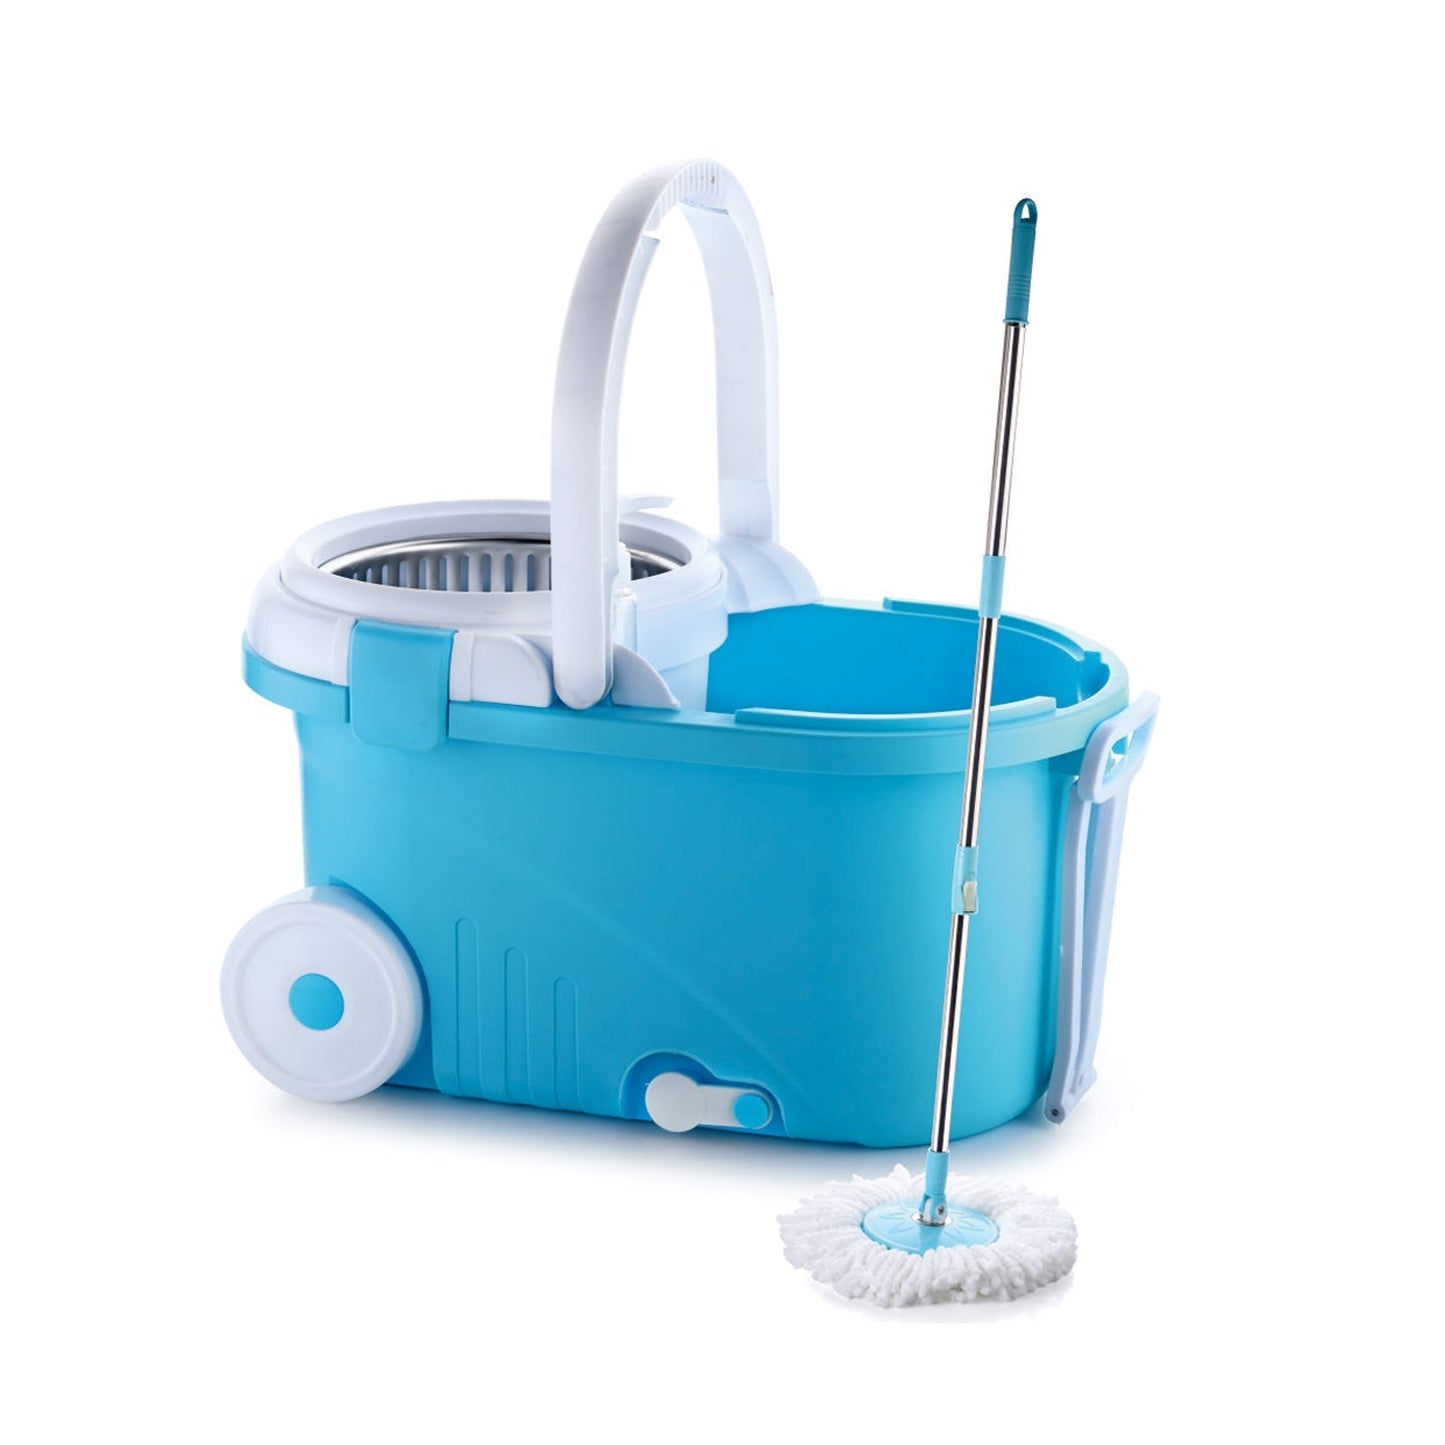 8713 GANESH Prime Plus Steel Spinner Bucket Mop 360 Degree Self Spin Wringing with 2 Absorbers for Home and Office Floor Cleaning Mops Set. DeoDap